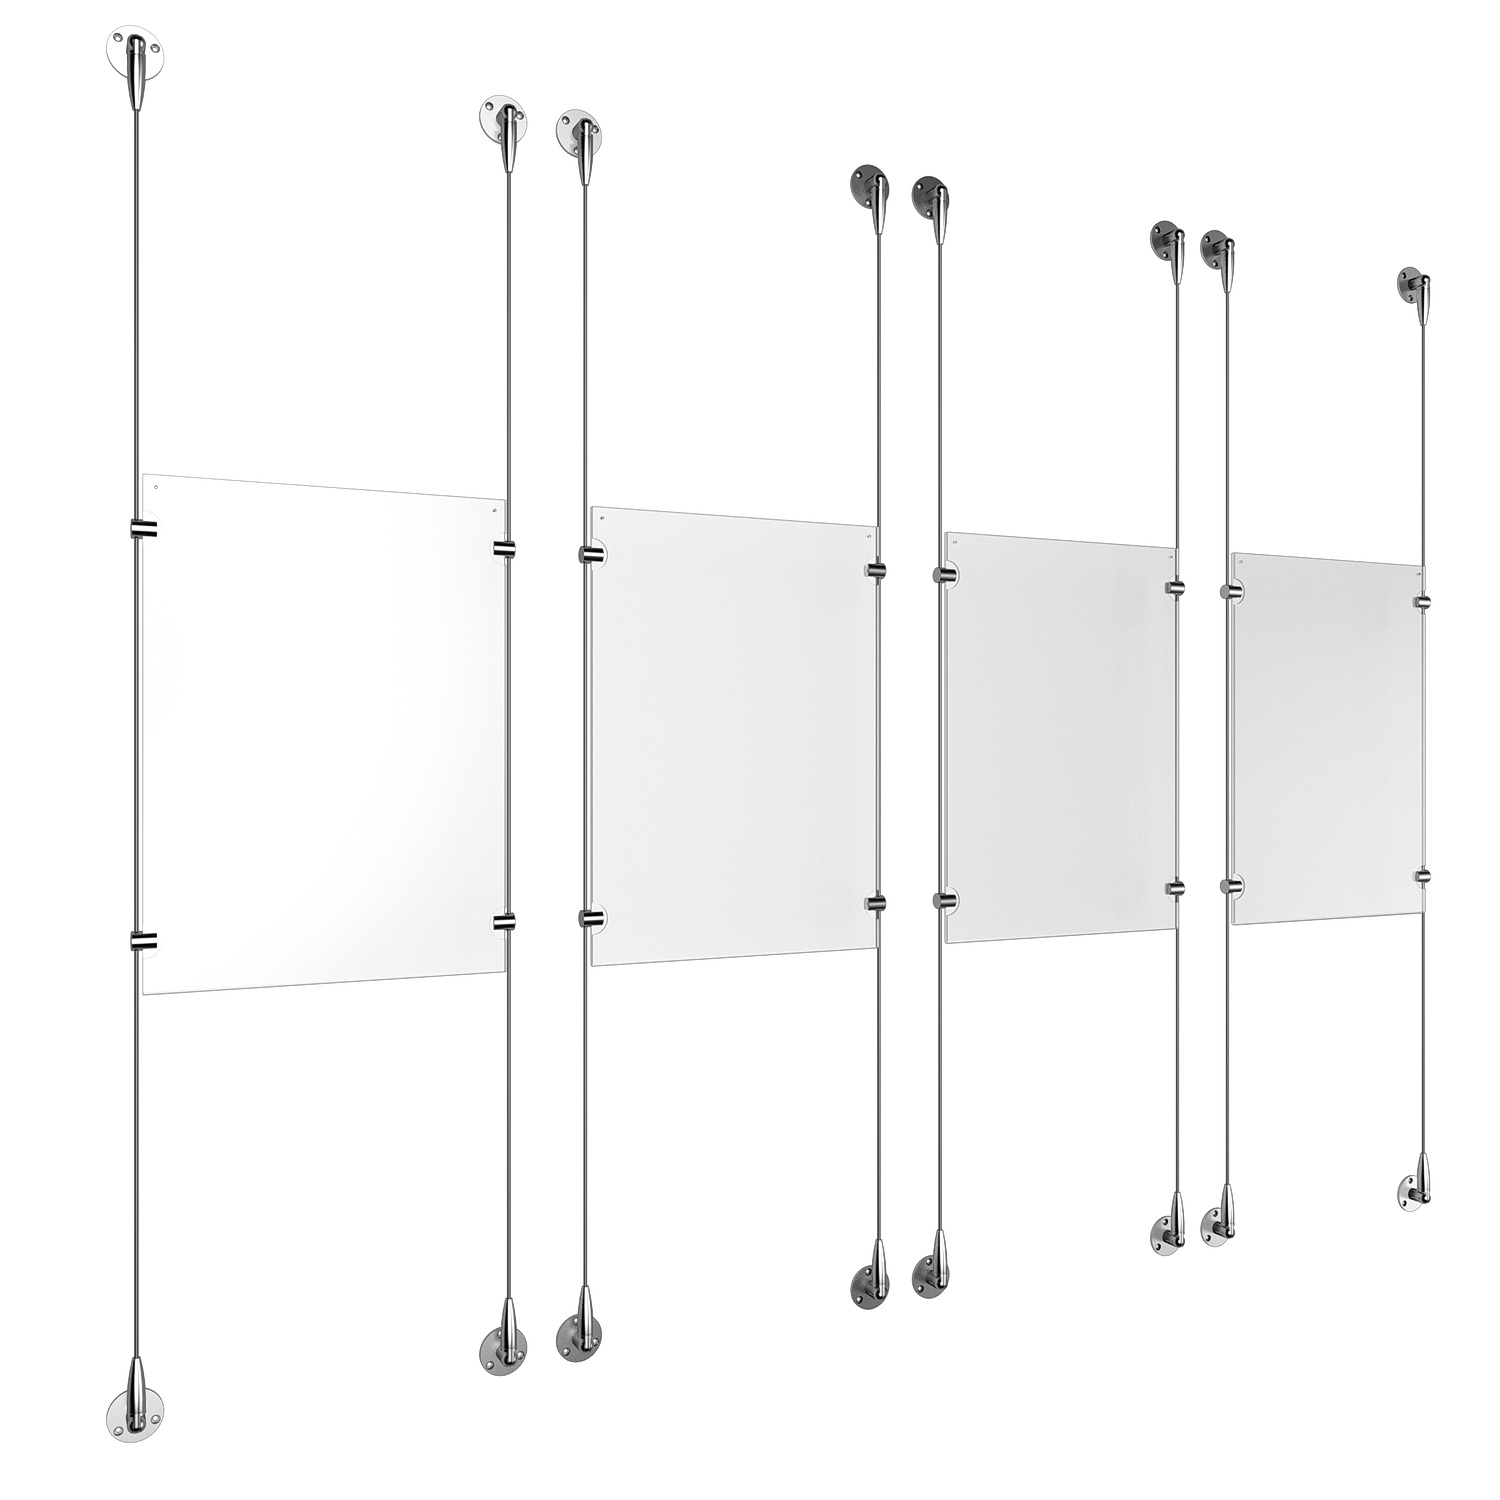 (4) 11'' Width x 17'' Height Clear Acrylic Frame & (8) Aluminum Clear Anodized Adjustable Angle Signature 1/8'' Diameter Cable Systems with (16) Single-Sided Panel Grippers